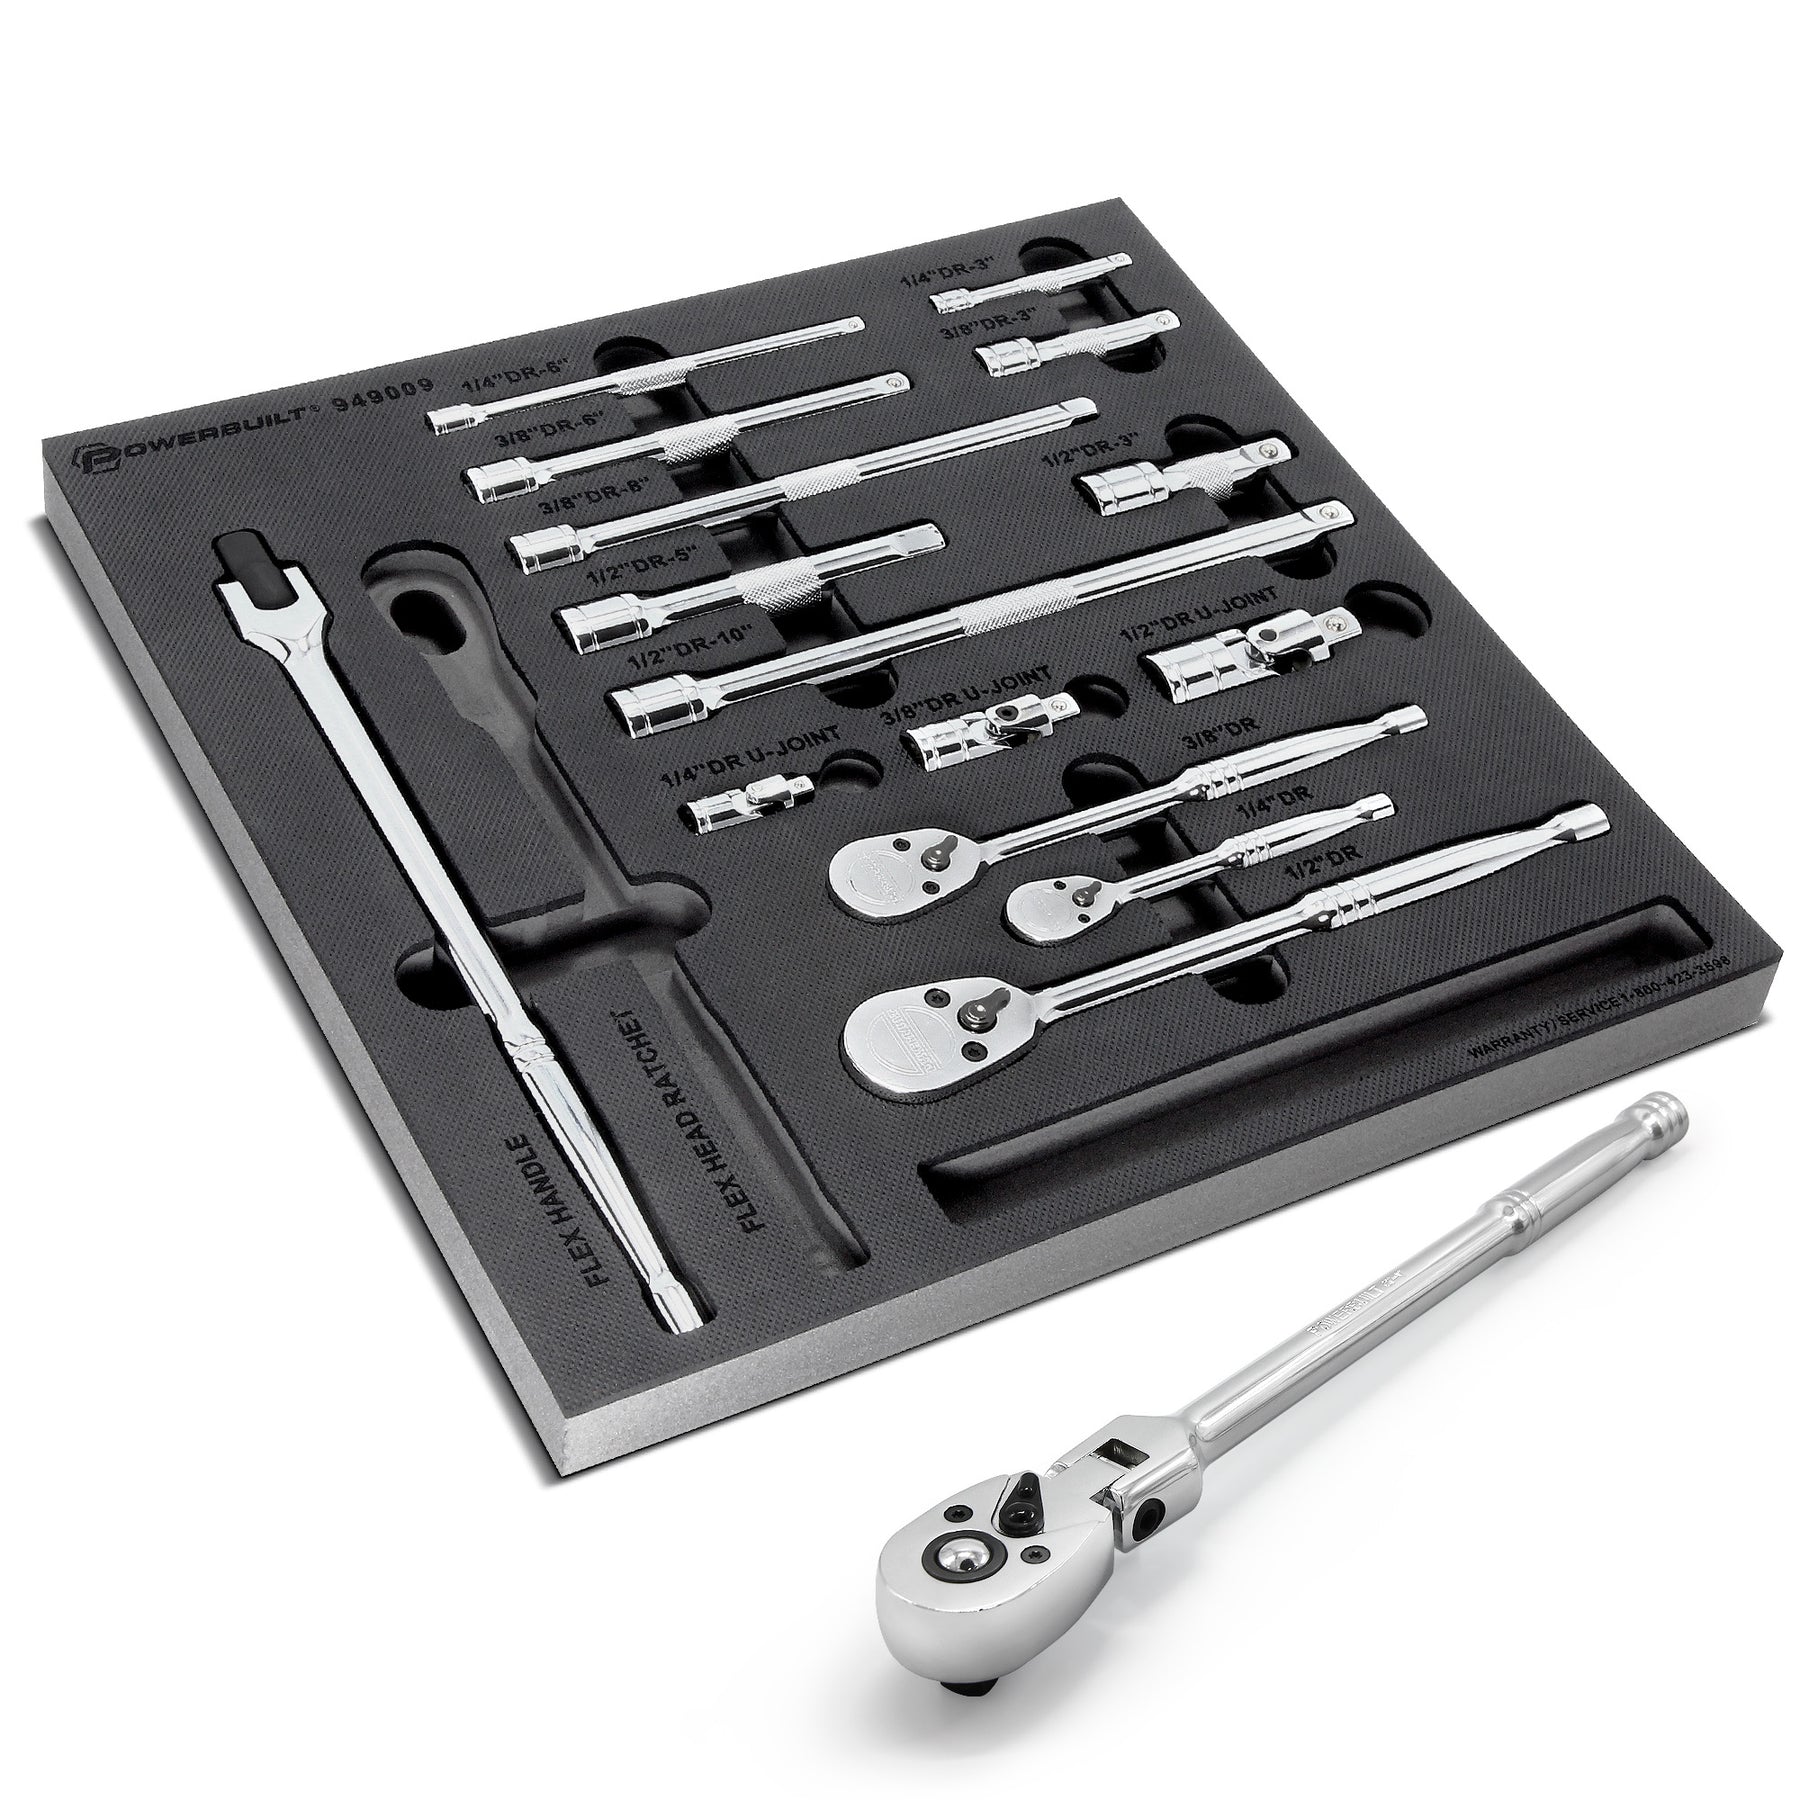 Master Ratchet and Accessories Set - 16 Piece - 1/4 - 3/8